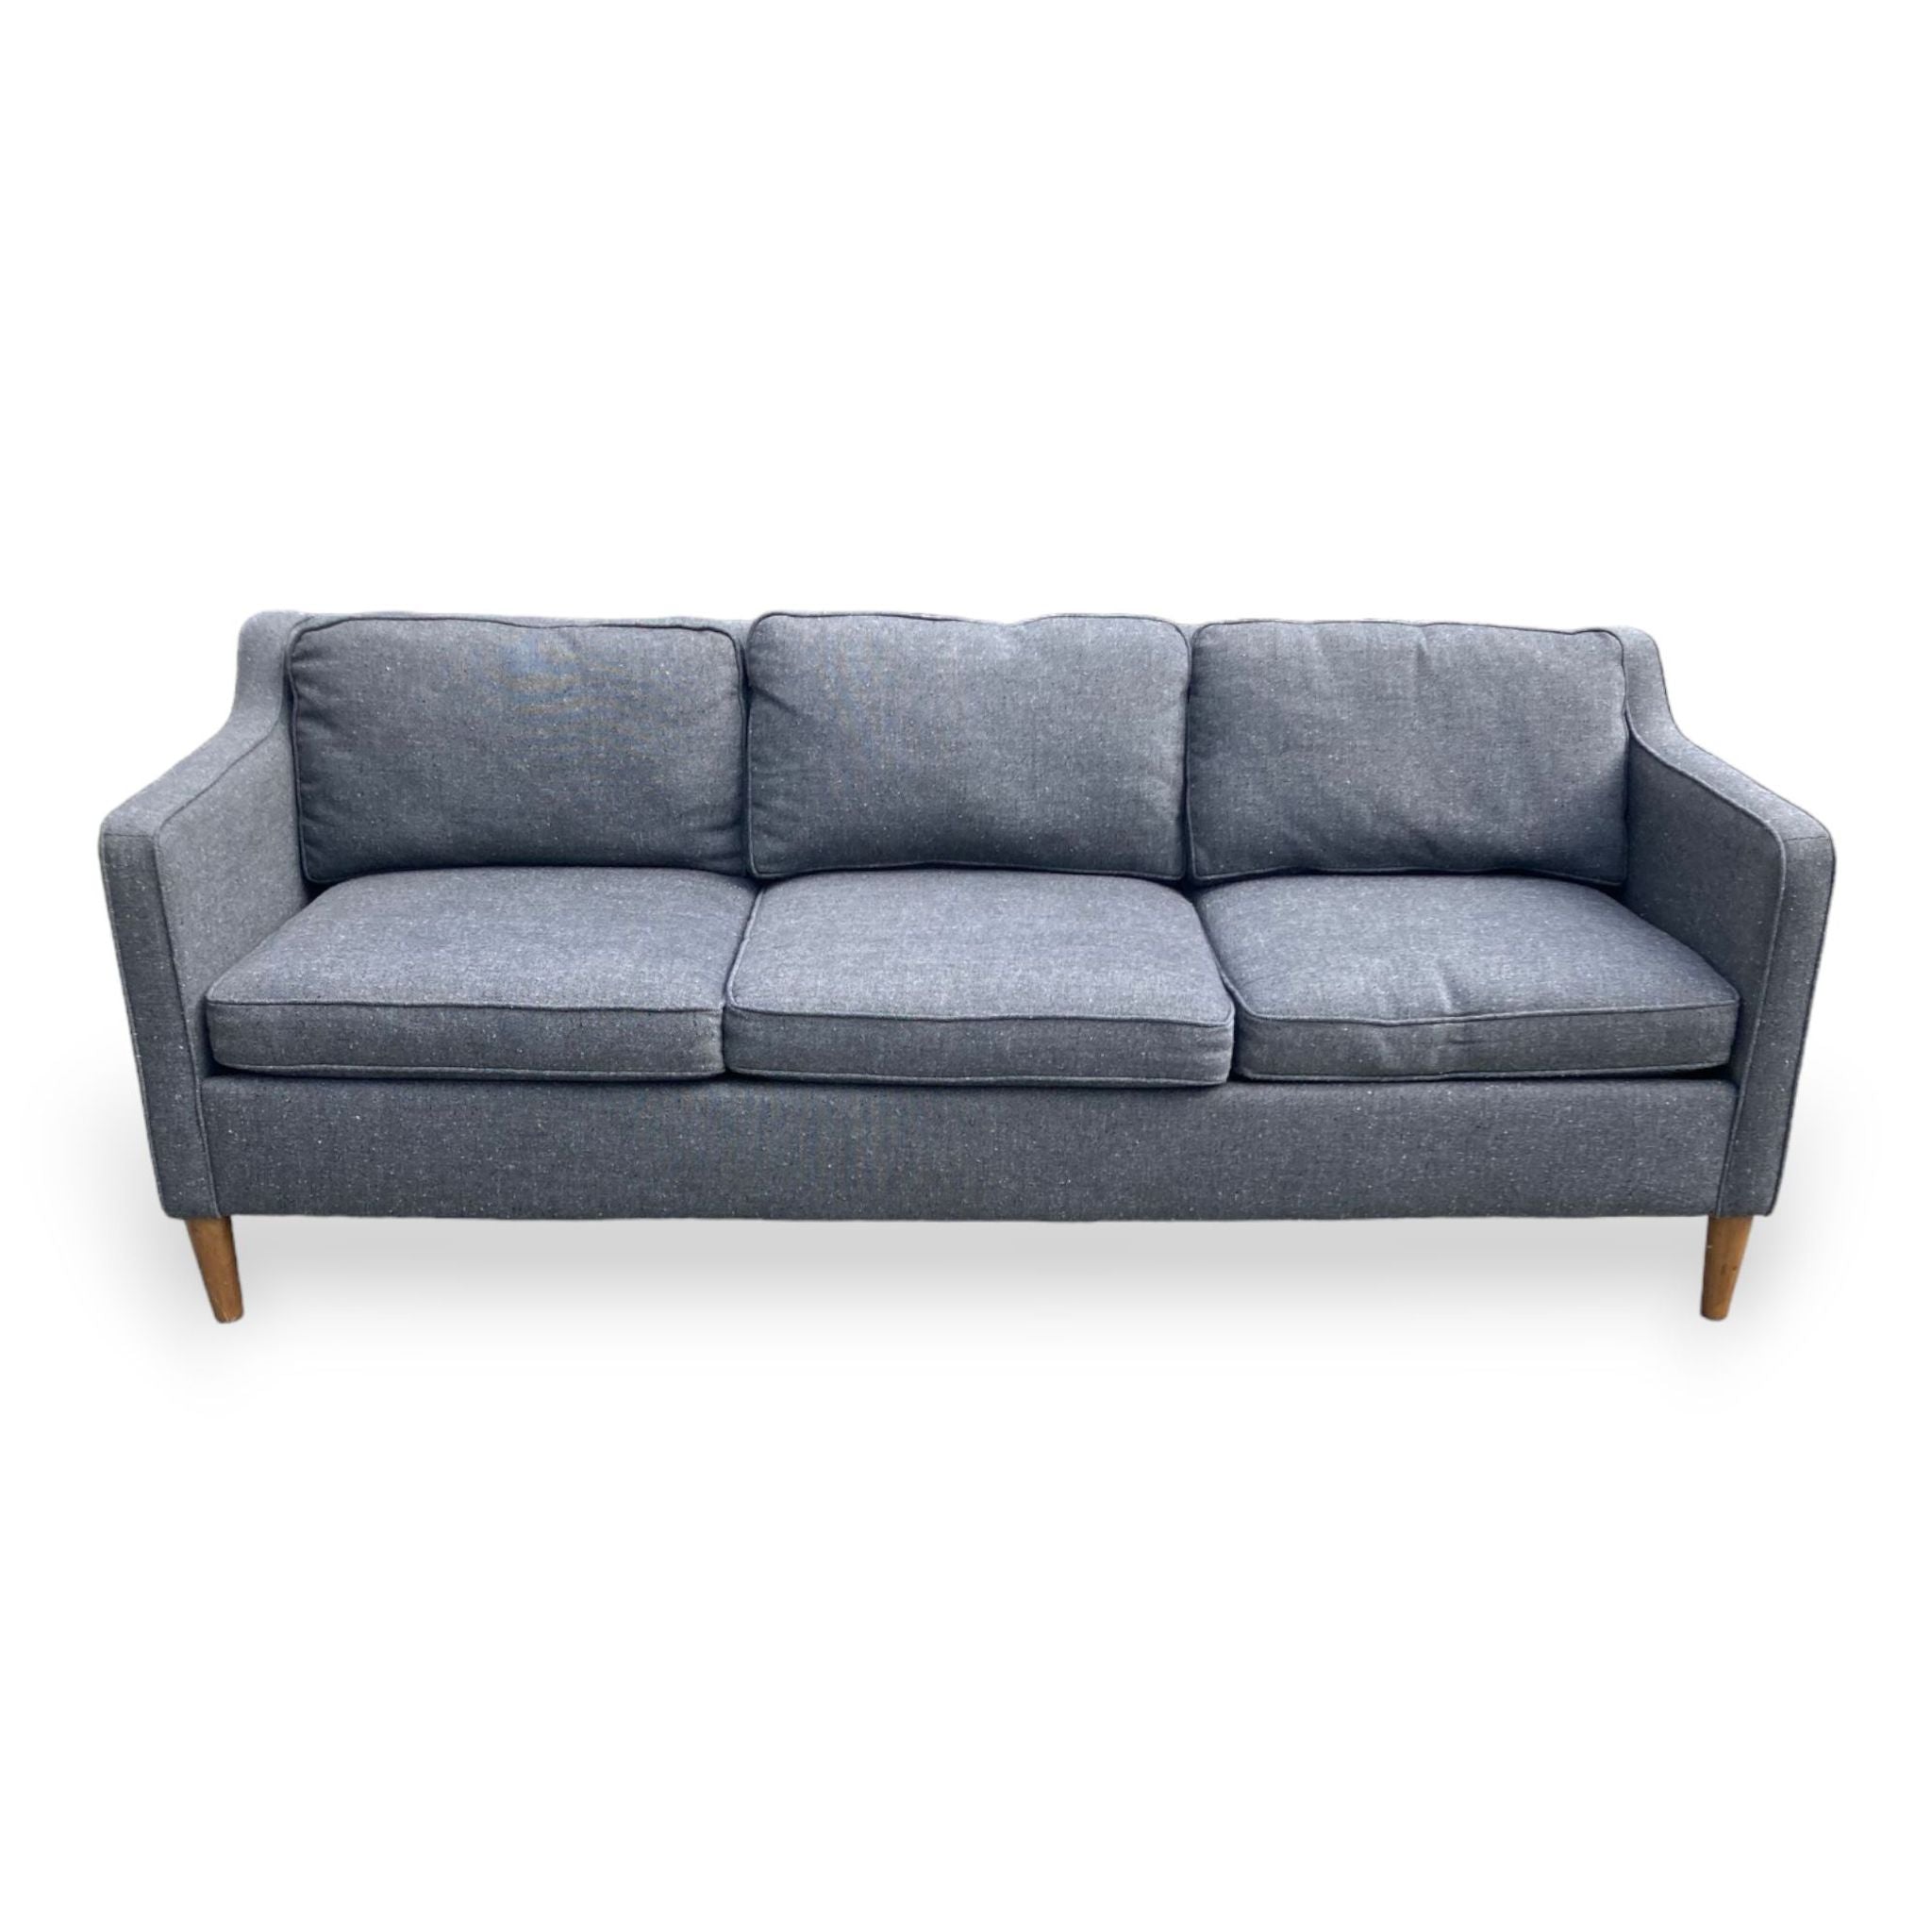 Alt text 1: West Elm Hamilton 3-seat sofa with 1950's inspired silhouette, narrow sloped arms, and solid wood feet against a white background.